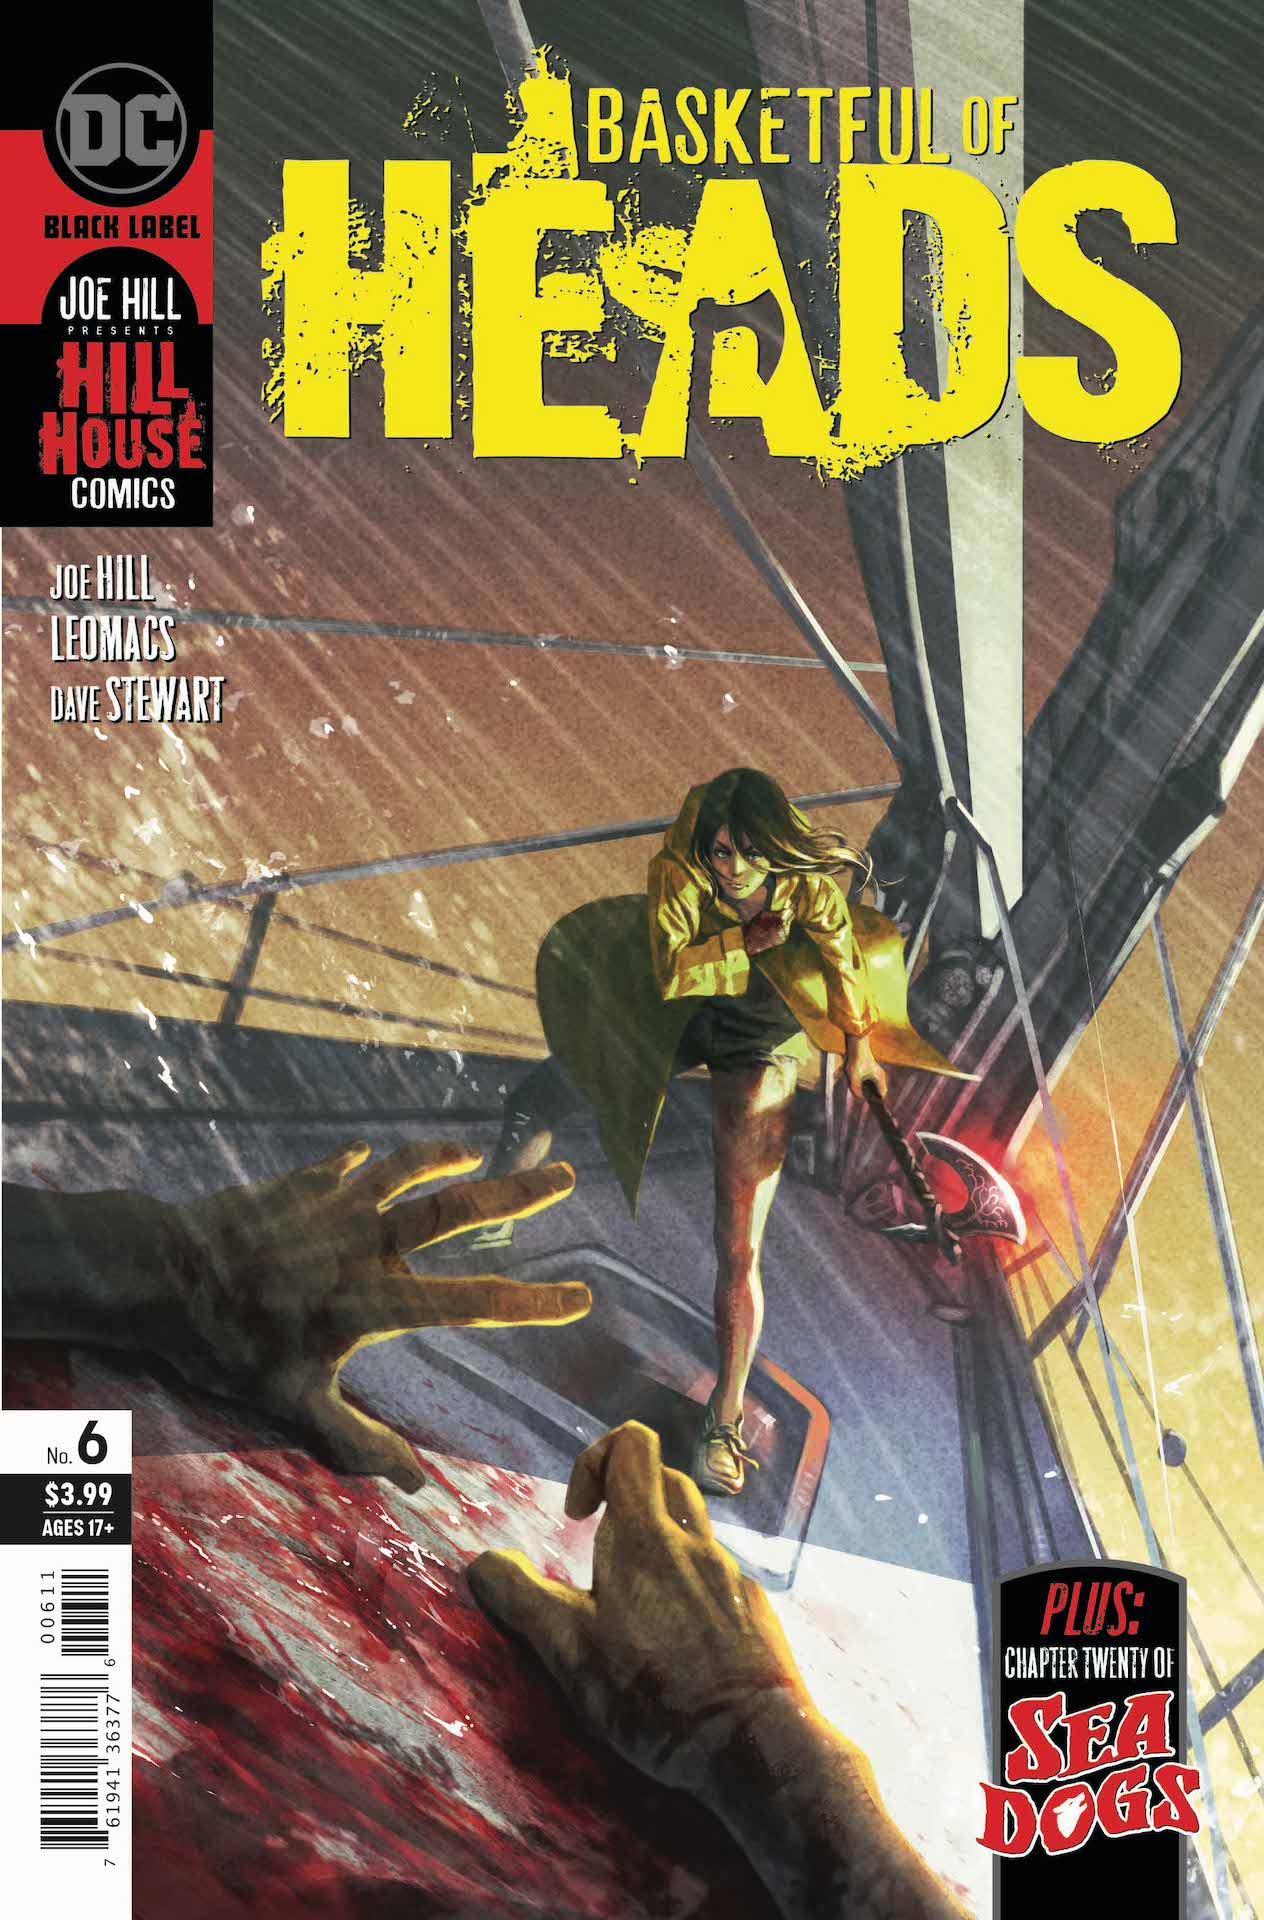 DC Preview: Basketful of Heads #6